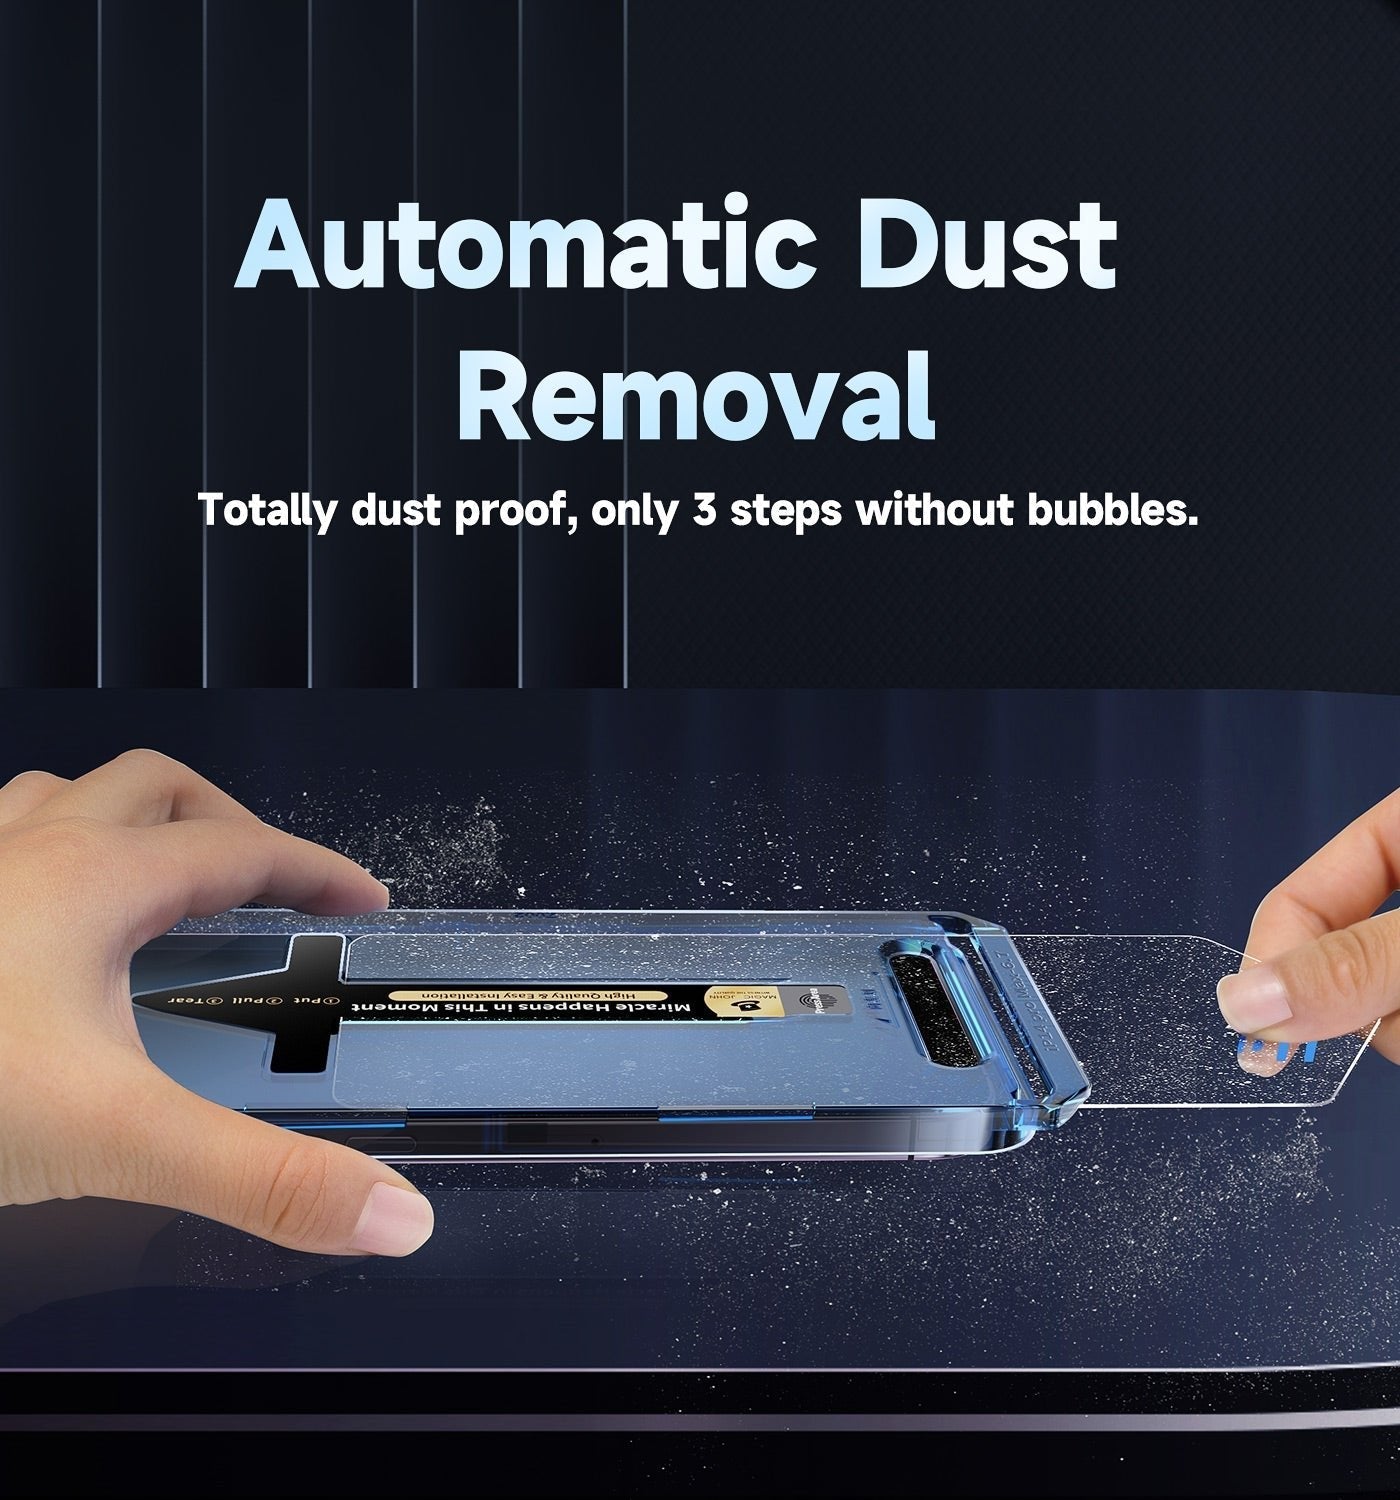 🎁Hot Sale 49% OFF⏳Invisible Artifact Screen Protector -Dust Free Without Bubbles